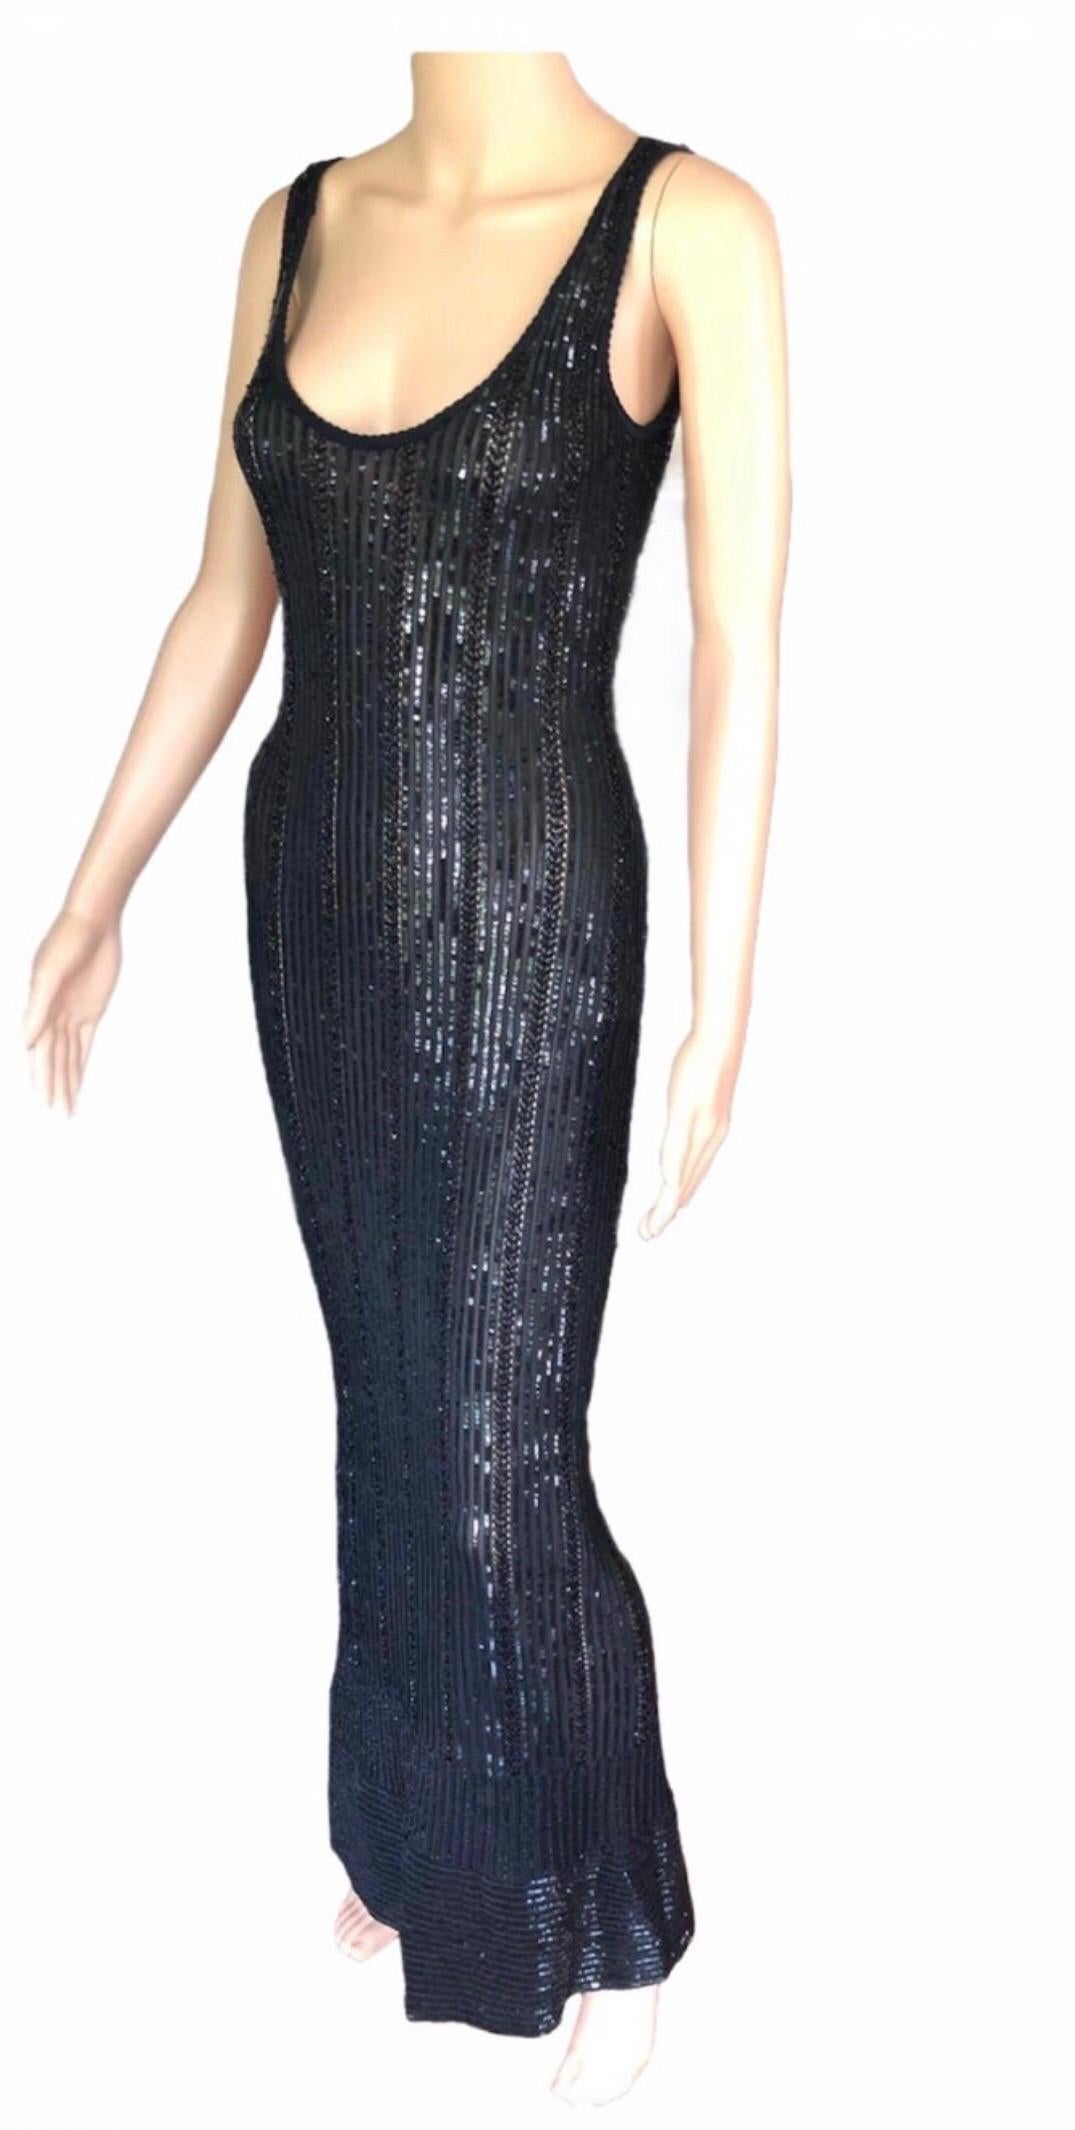 Azzedine Alaia Vintage S/S 1996 Runway Black Sequin Embellished Dress Gown For Sale 1